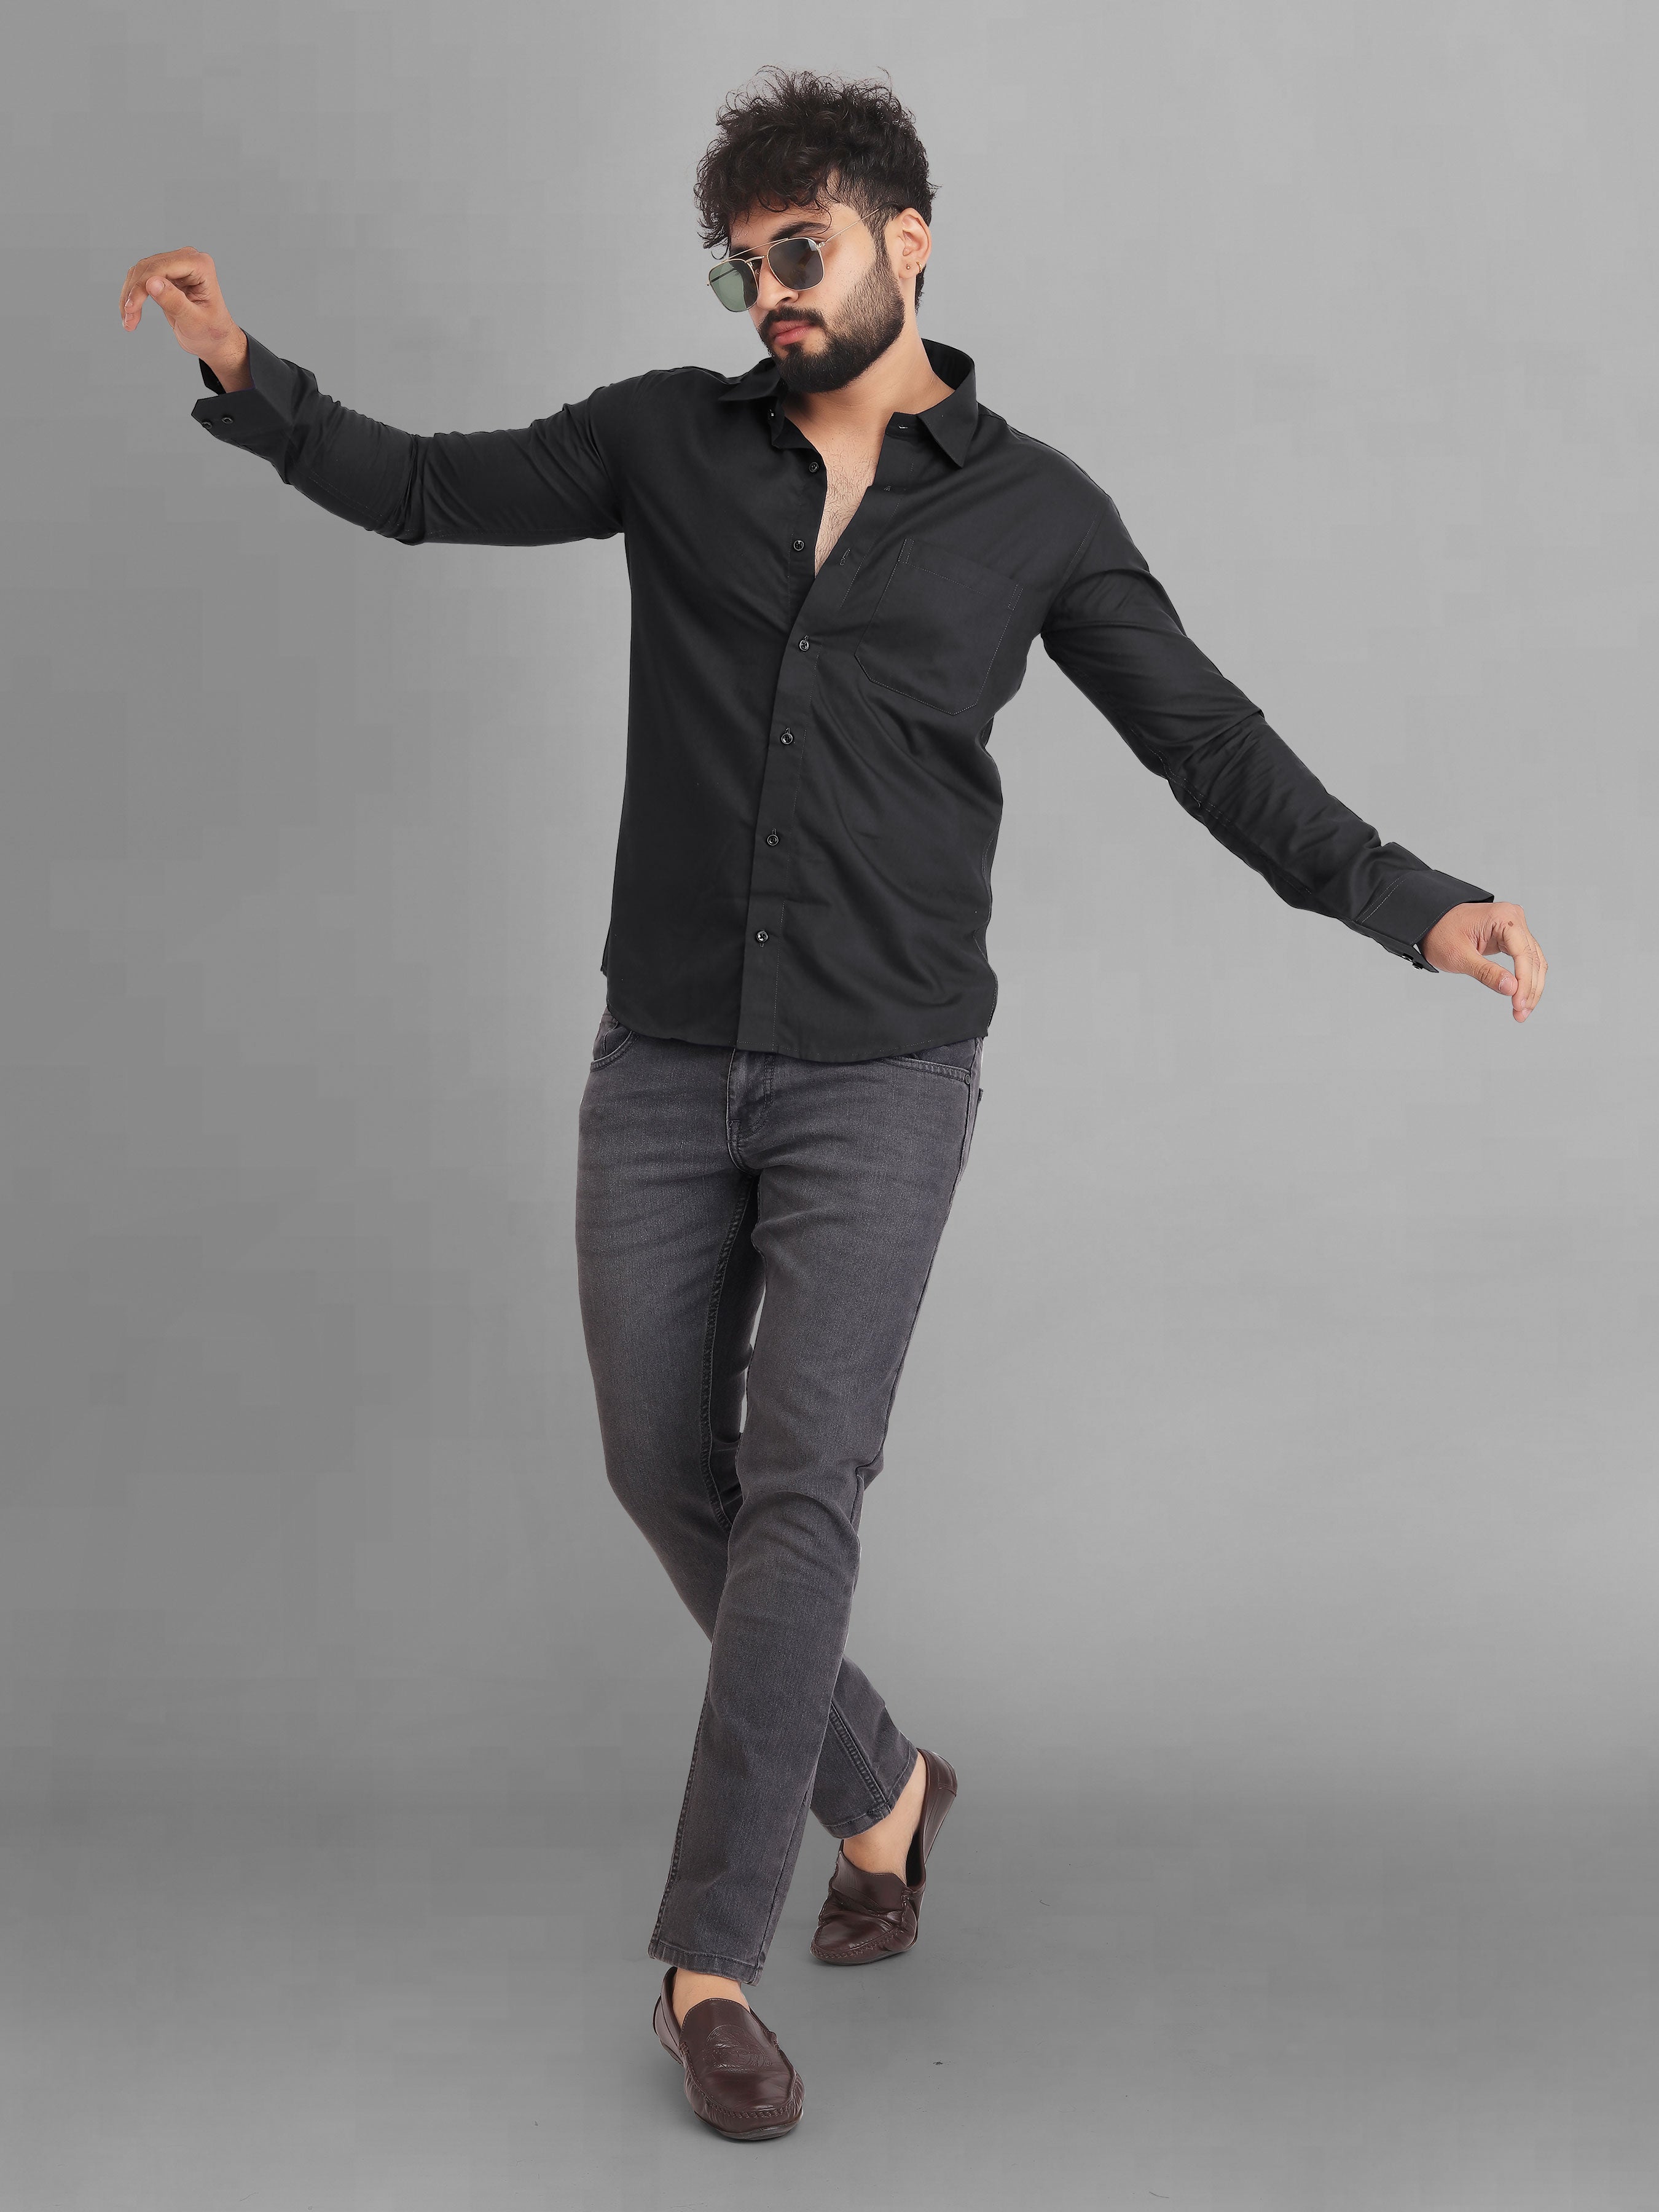 Black Soft and cozy henley casual shirt